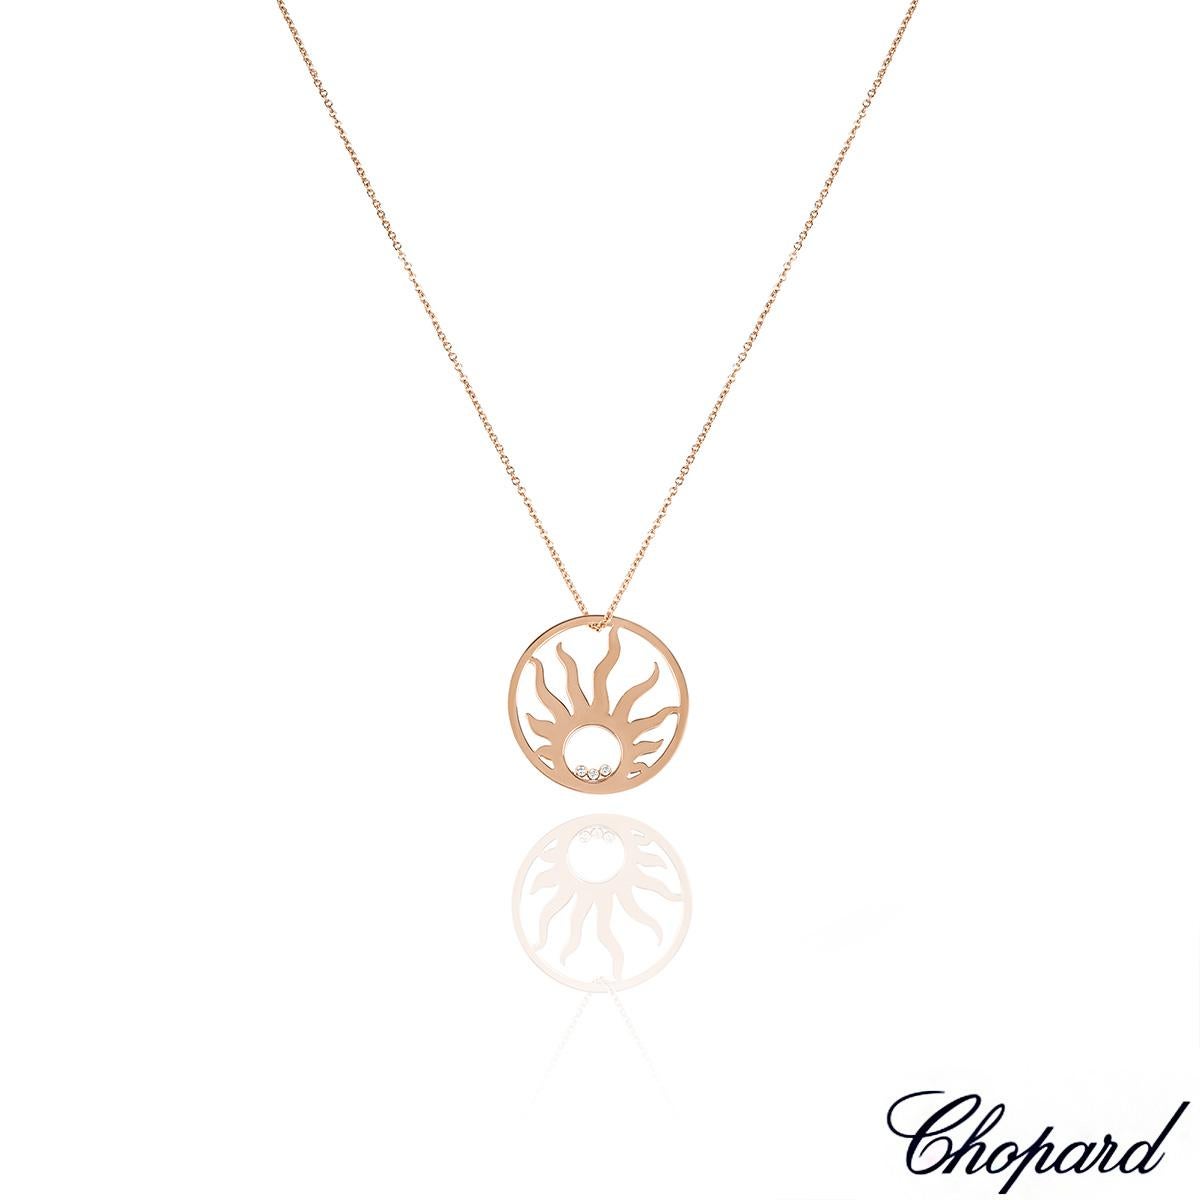 A unique 18k rose gold Chopard diamond necklace from the Happy Diamonds collection. The necklace comprises of a circular disk motif with a sunray in the centre, complemented by 3 floating round brilliant cut diamonds encased behind the iconic signed